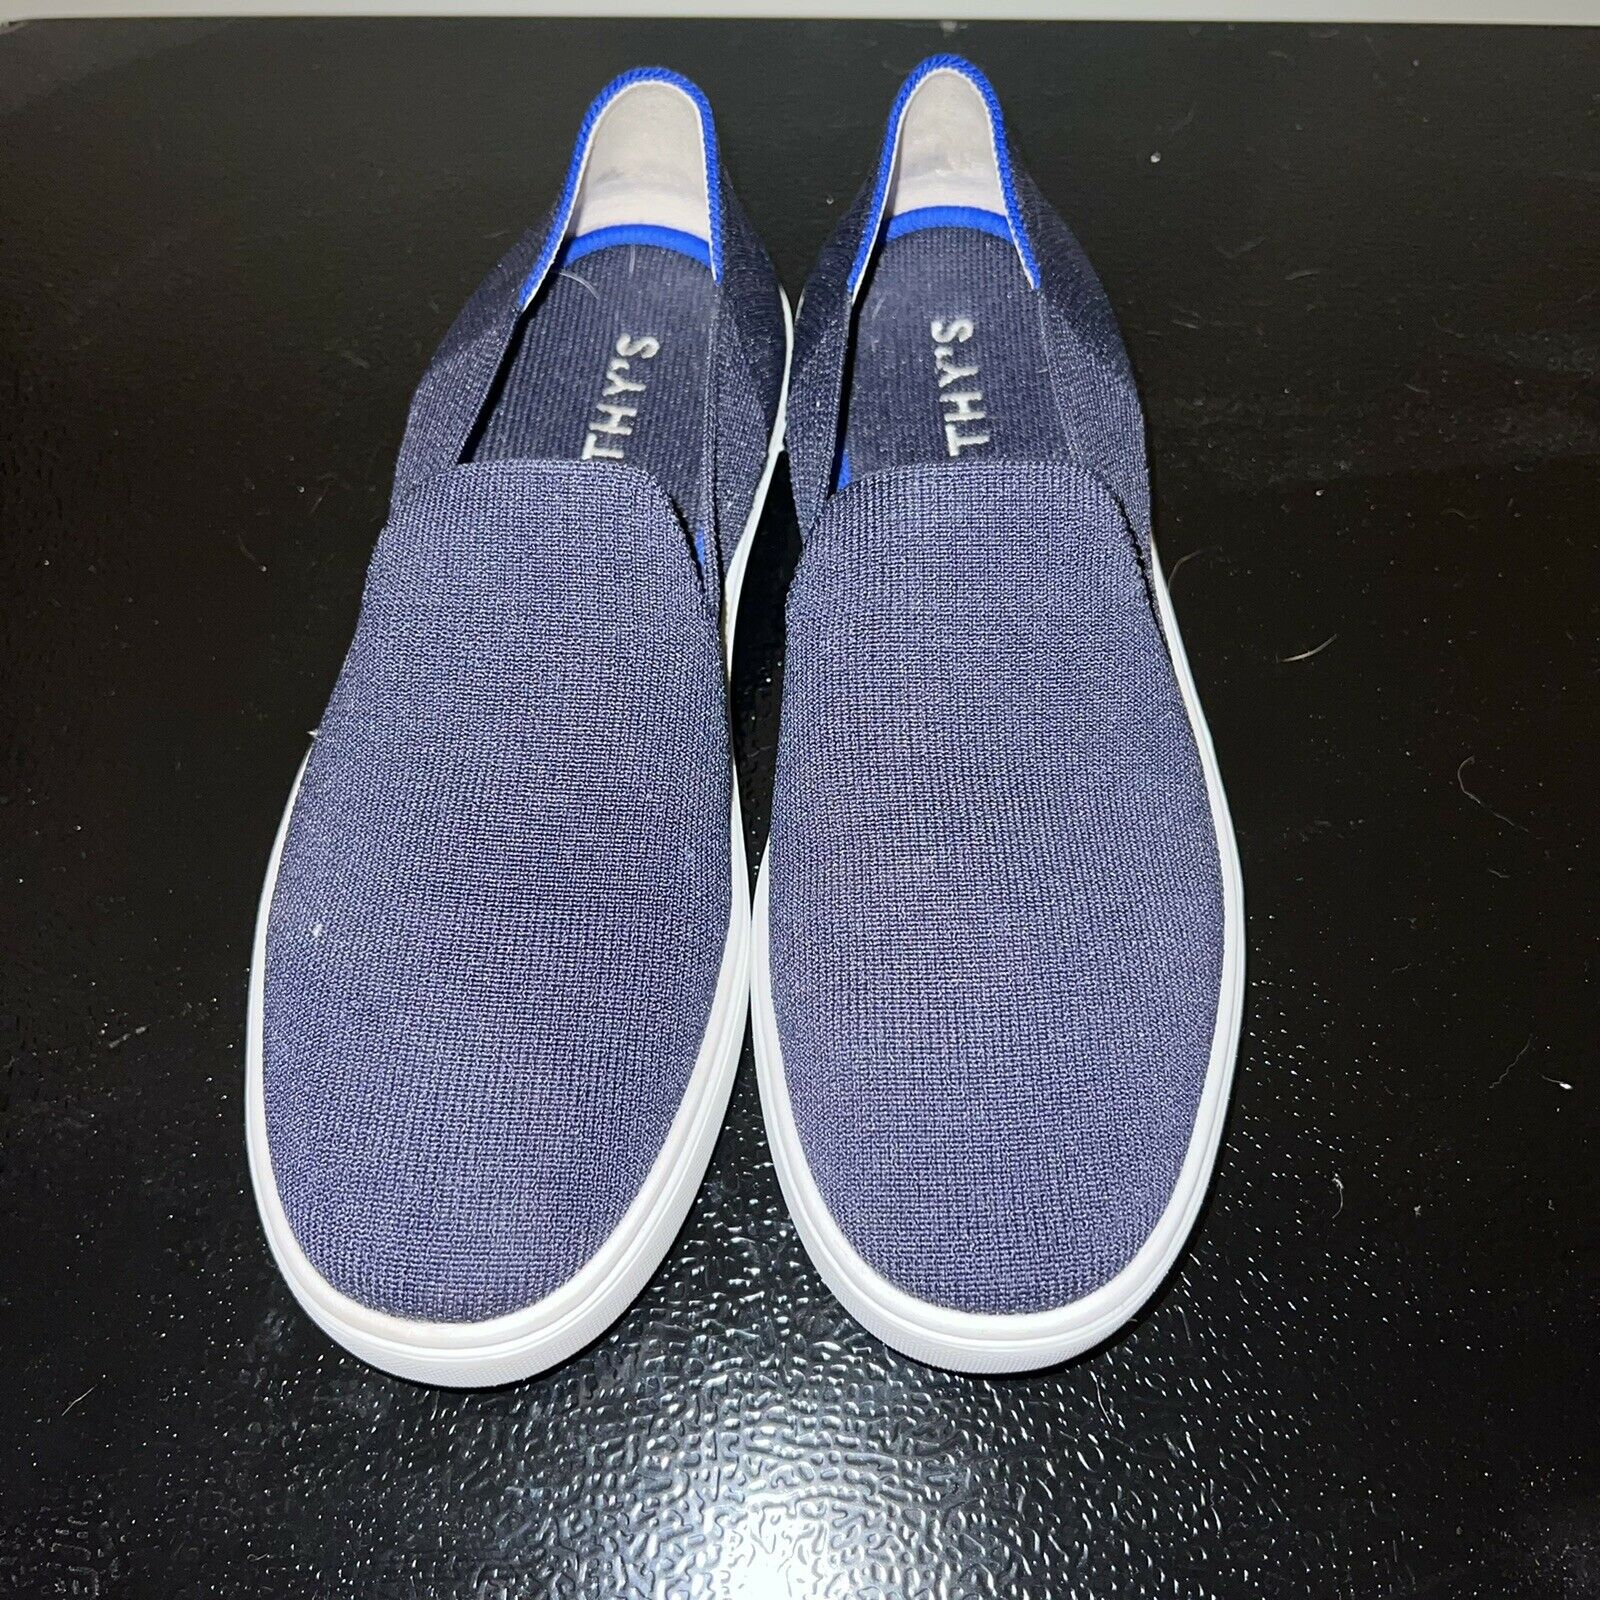 ROTHYS The Sneaker Navy Blue Slip On Shoes Womens Size 8.5 Sneakers Retired!